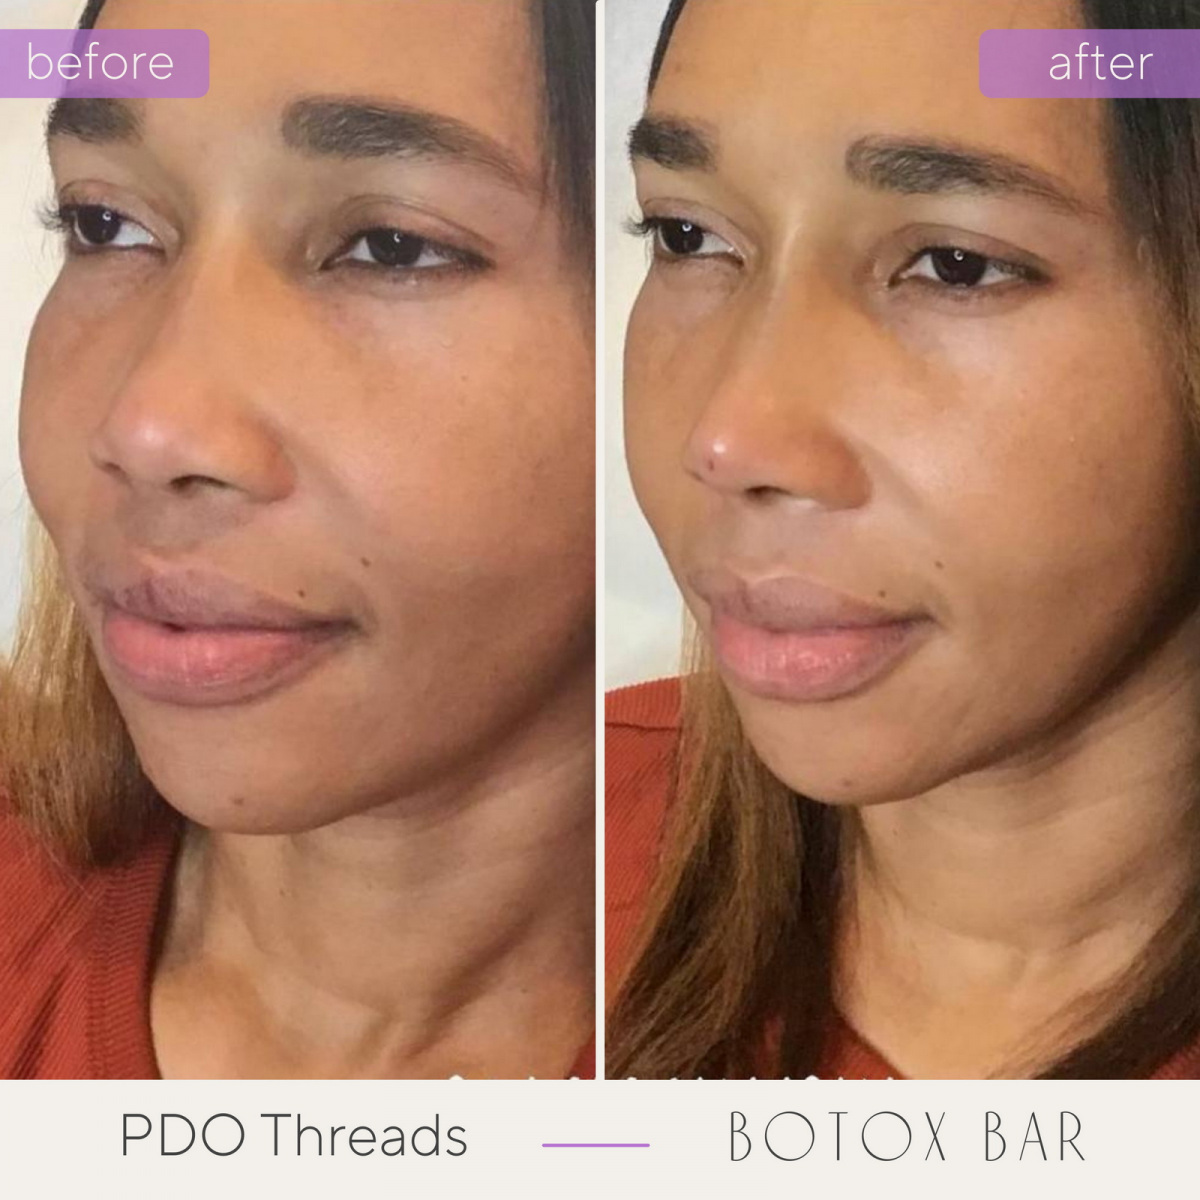 Before and After Liquid Nose Job in The Botox Bar and Aesthetics at Dallas & Sherman, TX